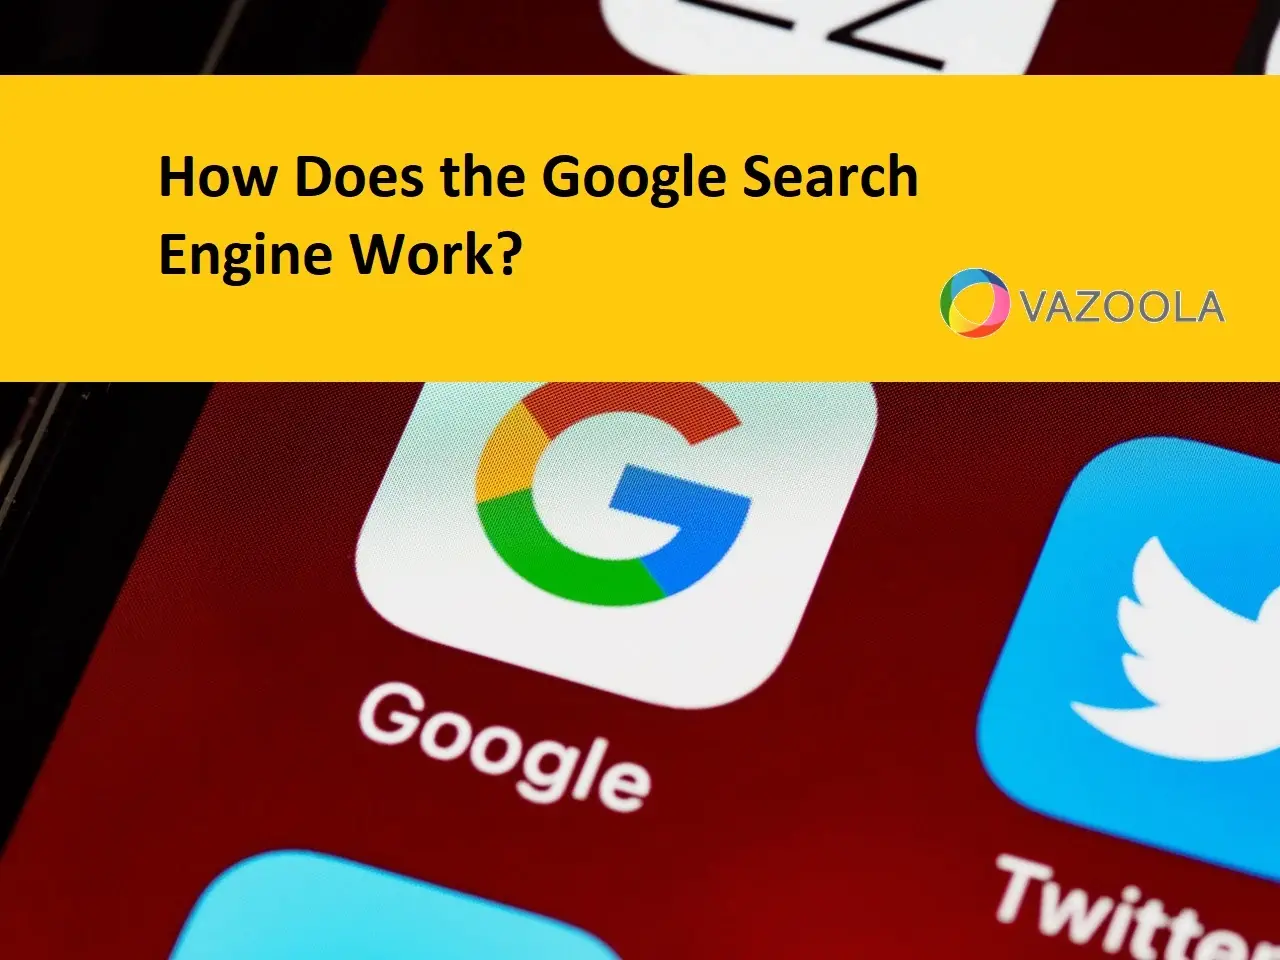 How Does the Google Search Engine Work?